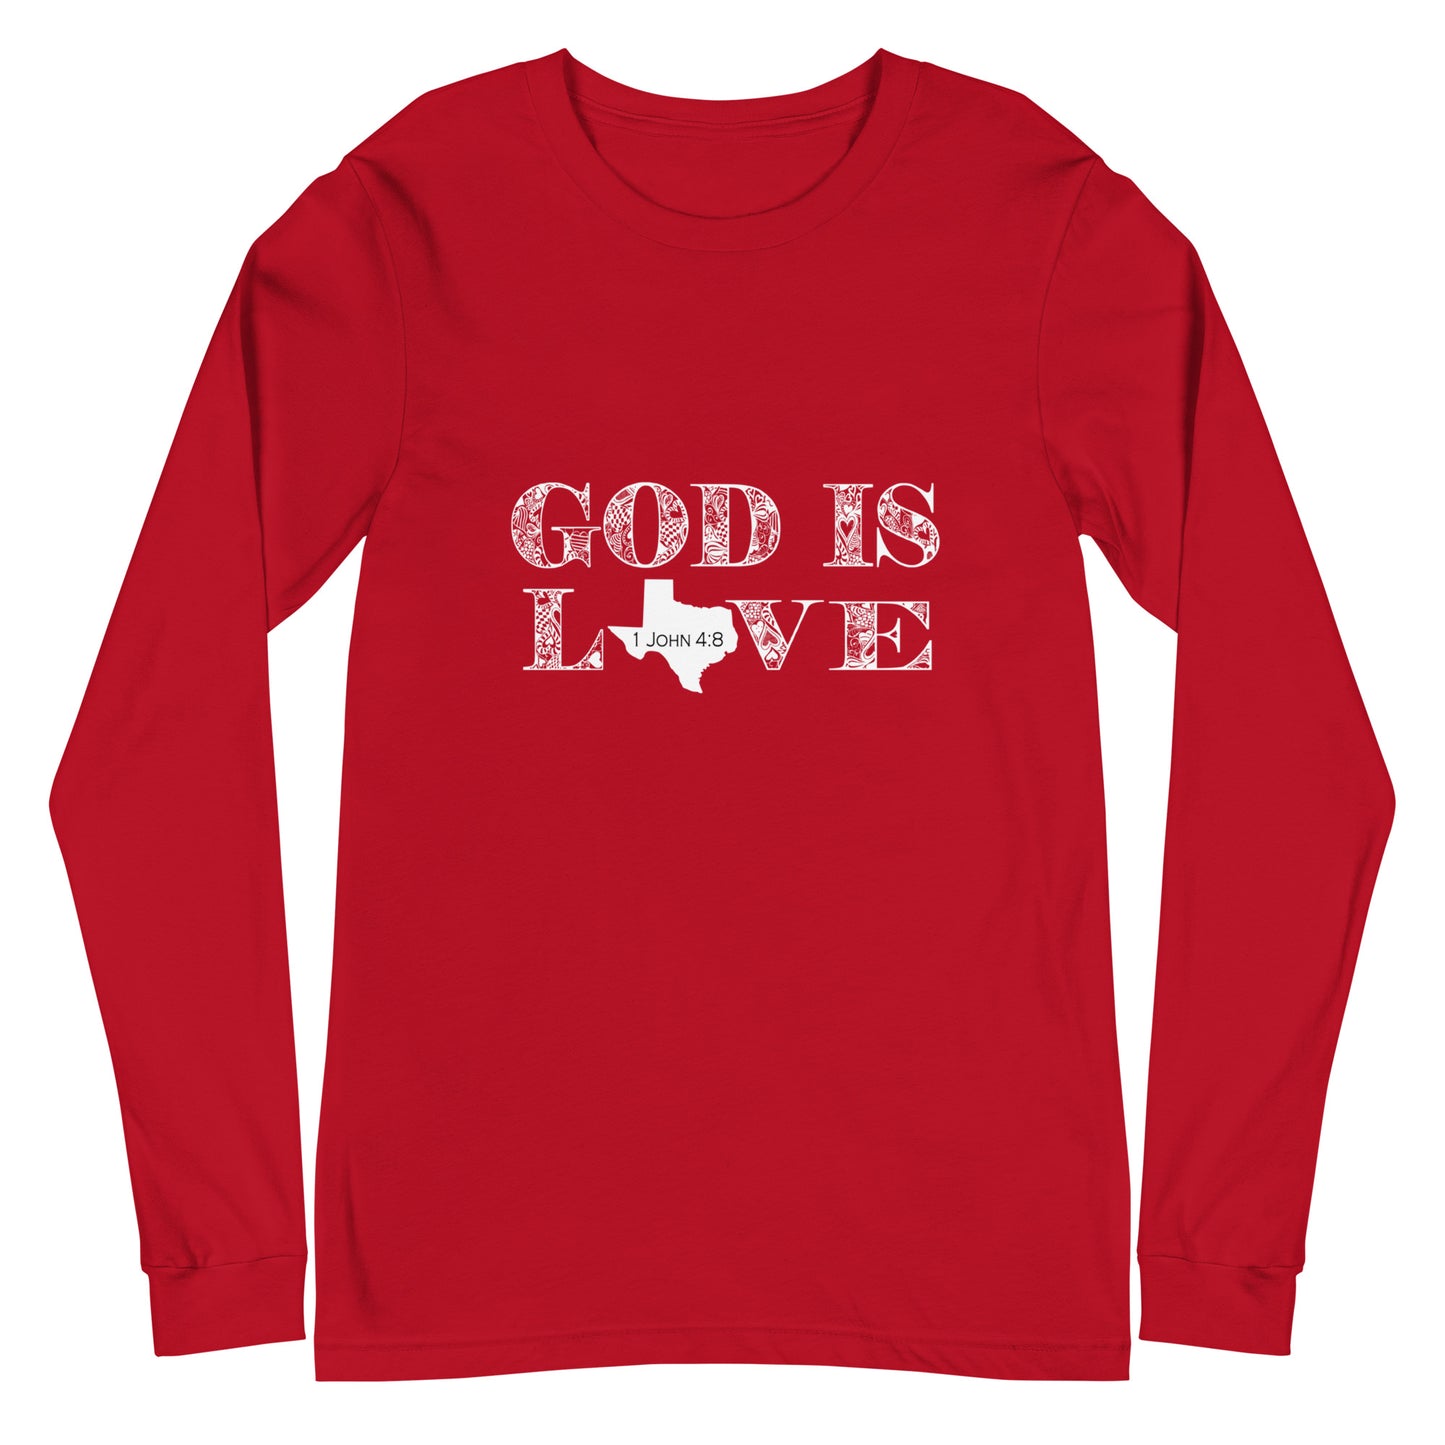 Graphic Christian red long-sleeve tee with 1 John 4:8 on it. This piece of Christian apparel is a reminder of who God is. Grab this unique long-sleeve tee from the Christian-based company Olive Grove Life.